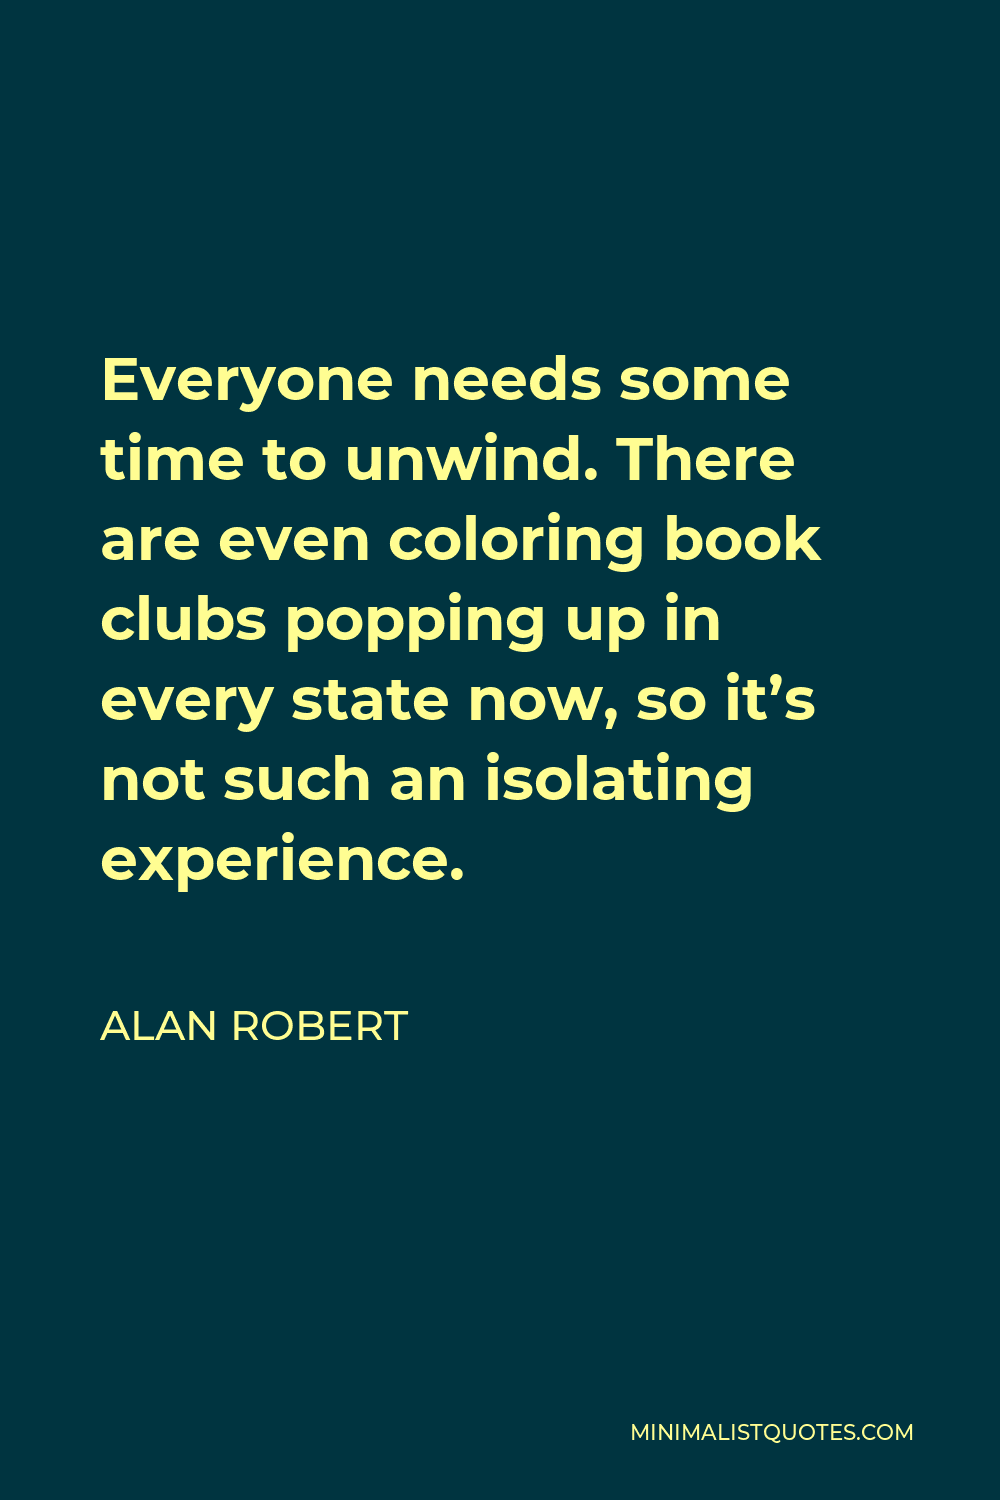 Alan Robert Quote - Everyone needs some time to unwind. There are even coloring book clubs popping up in every state now, so it’s not such an isolating experience.